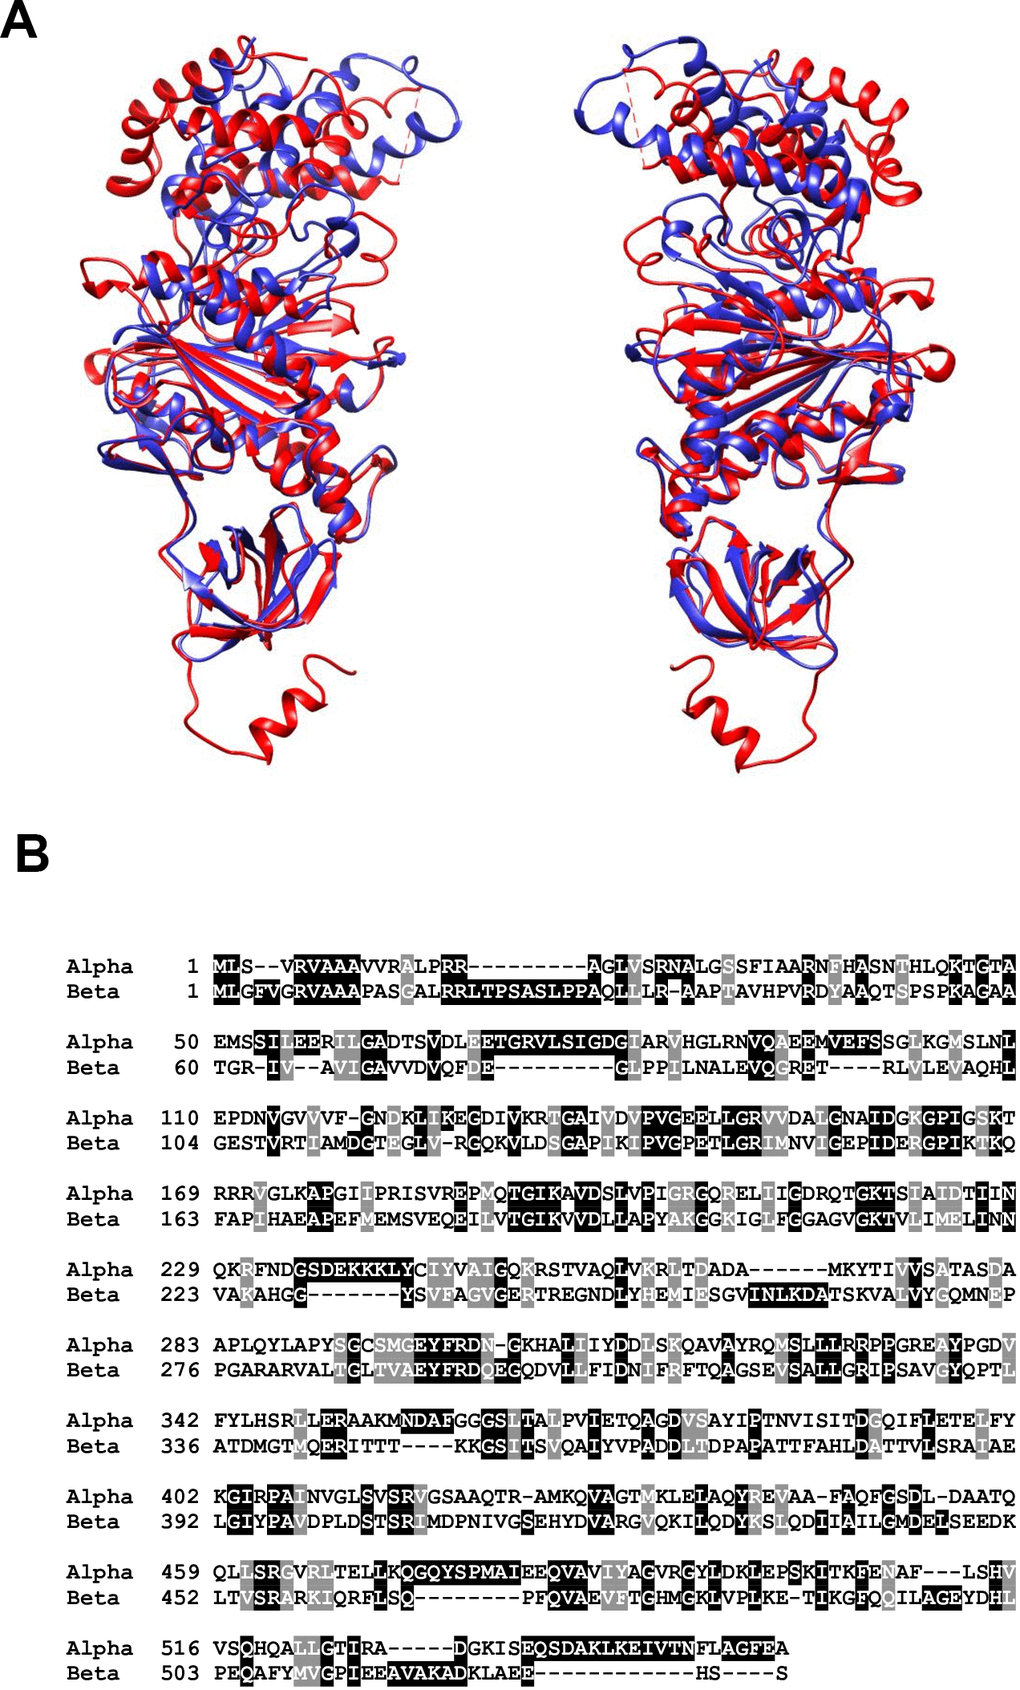 (A) Structural alignment of the alpha (red) and beta (blue) subunits of mitochondrial ATP synthase in S. scrofa. Both subunits are reproduced from image 6J5J in PDB (https://www.rcsb.org/structure/3ZIAhttp://doi.org/10.2210/pdb3ZIA/pdb) and processed using http://www.cgl.ucsf.edu/chimera/. (B) BLAST alignment of the primary amino acid sequences of H. sapiens alpha (UniProt P25705) and beta (UniProt P06576) subunits performed using https://blast.ncbi.nlm.nih.gov/Blast.cgi?PAGE=Proteins.